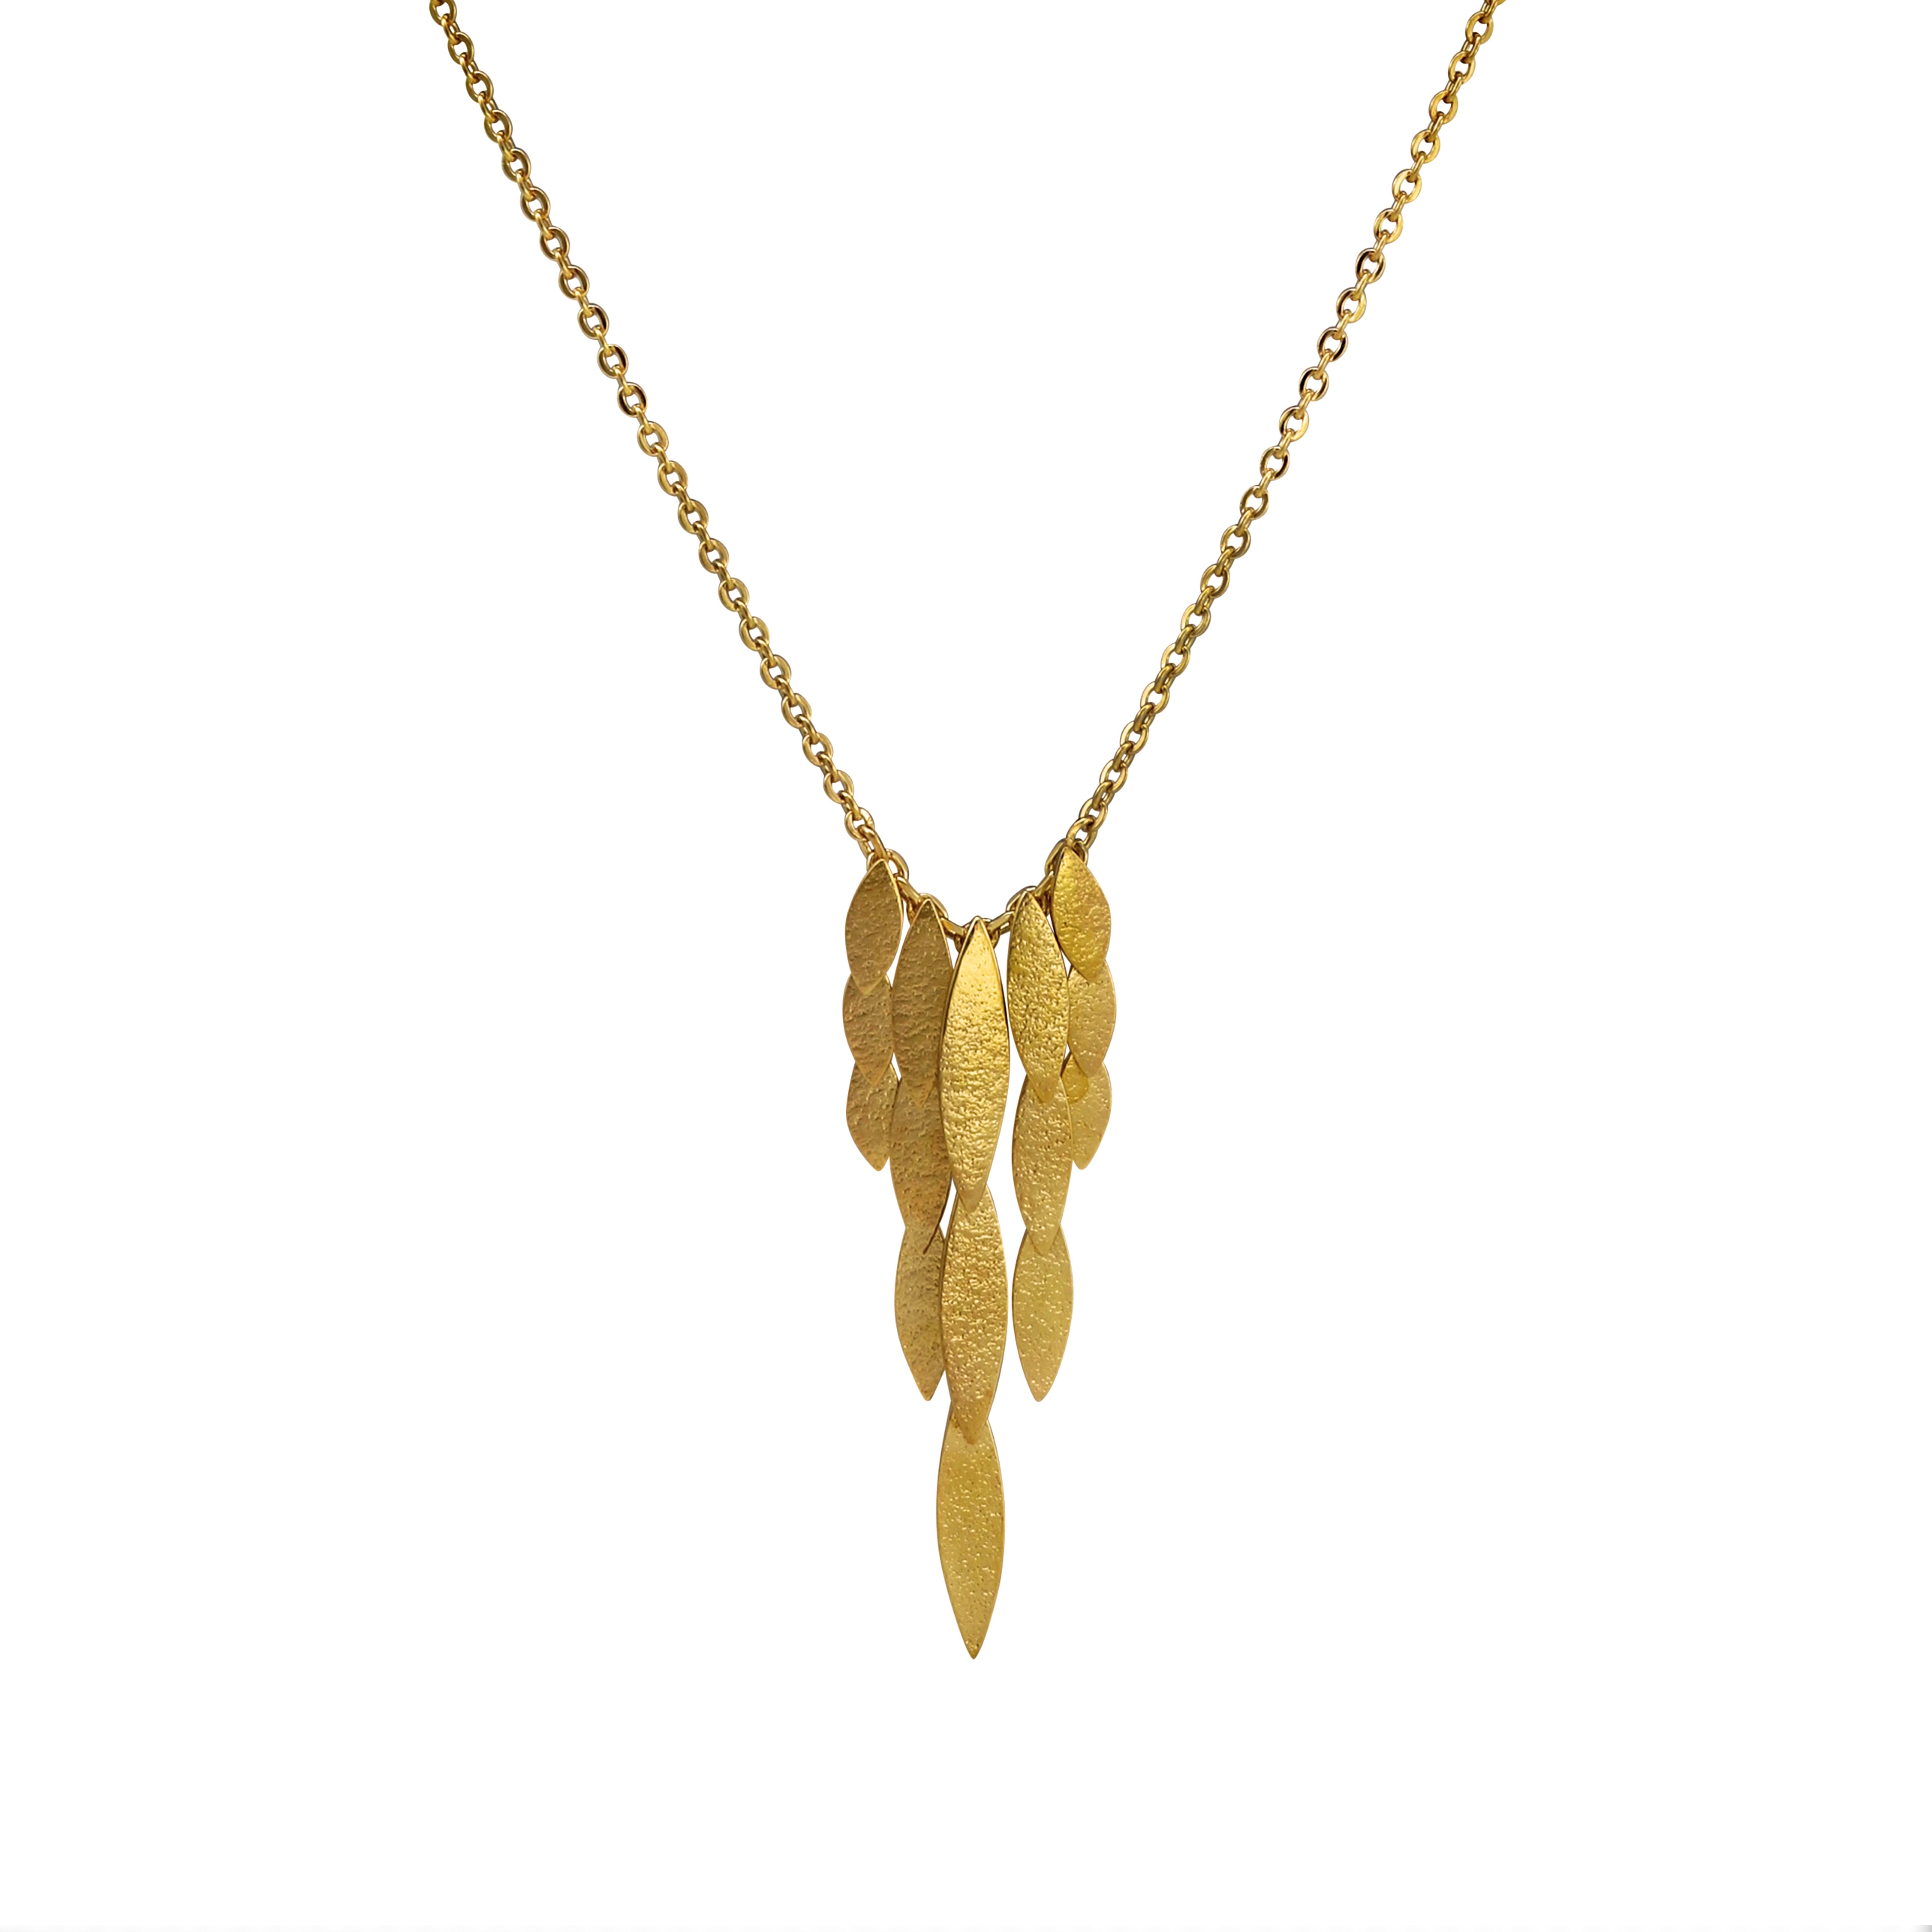 Icarus Waterfall Necklace Gold Vermeil | Contemporary Necklaces ...